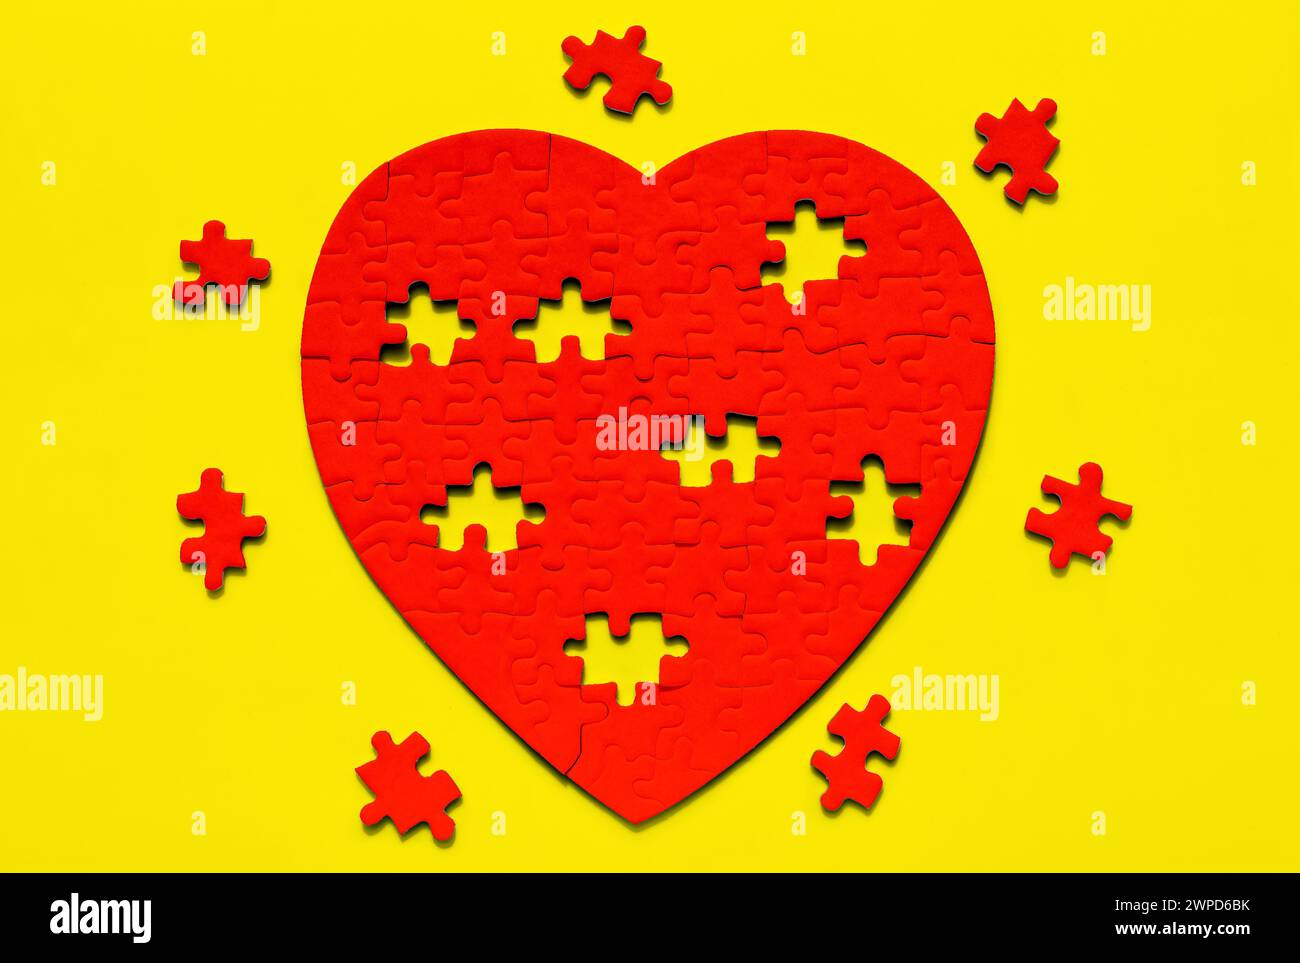 Red heart-shaped puzzle resting on a yellow backdrop, with missing pieces arranged around it. Creative Valentine's Day background. Stock Photo